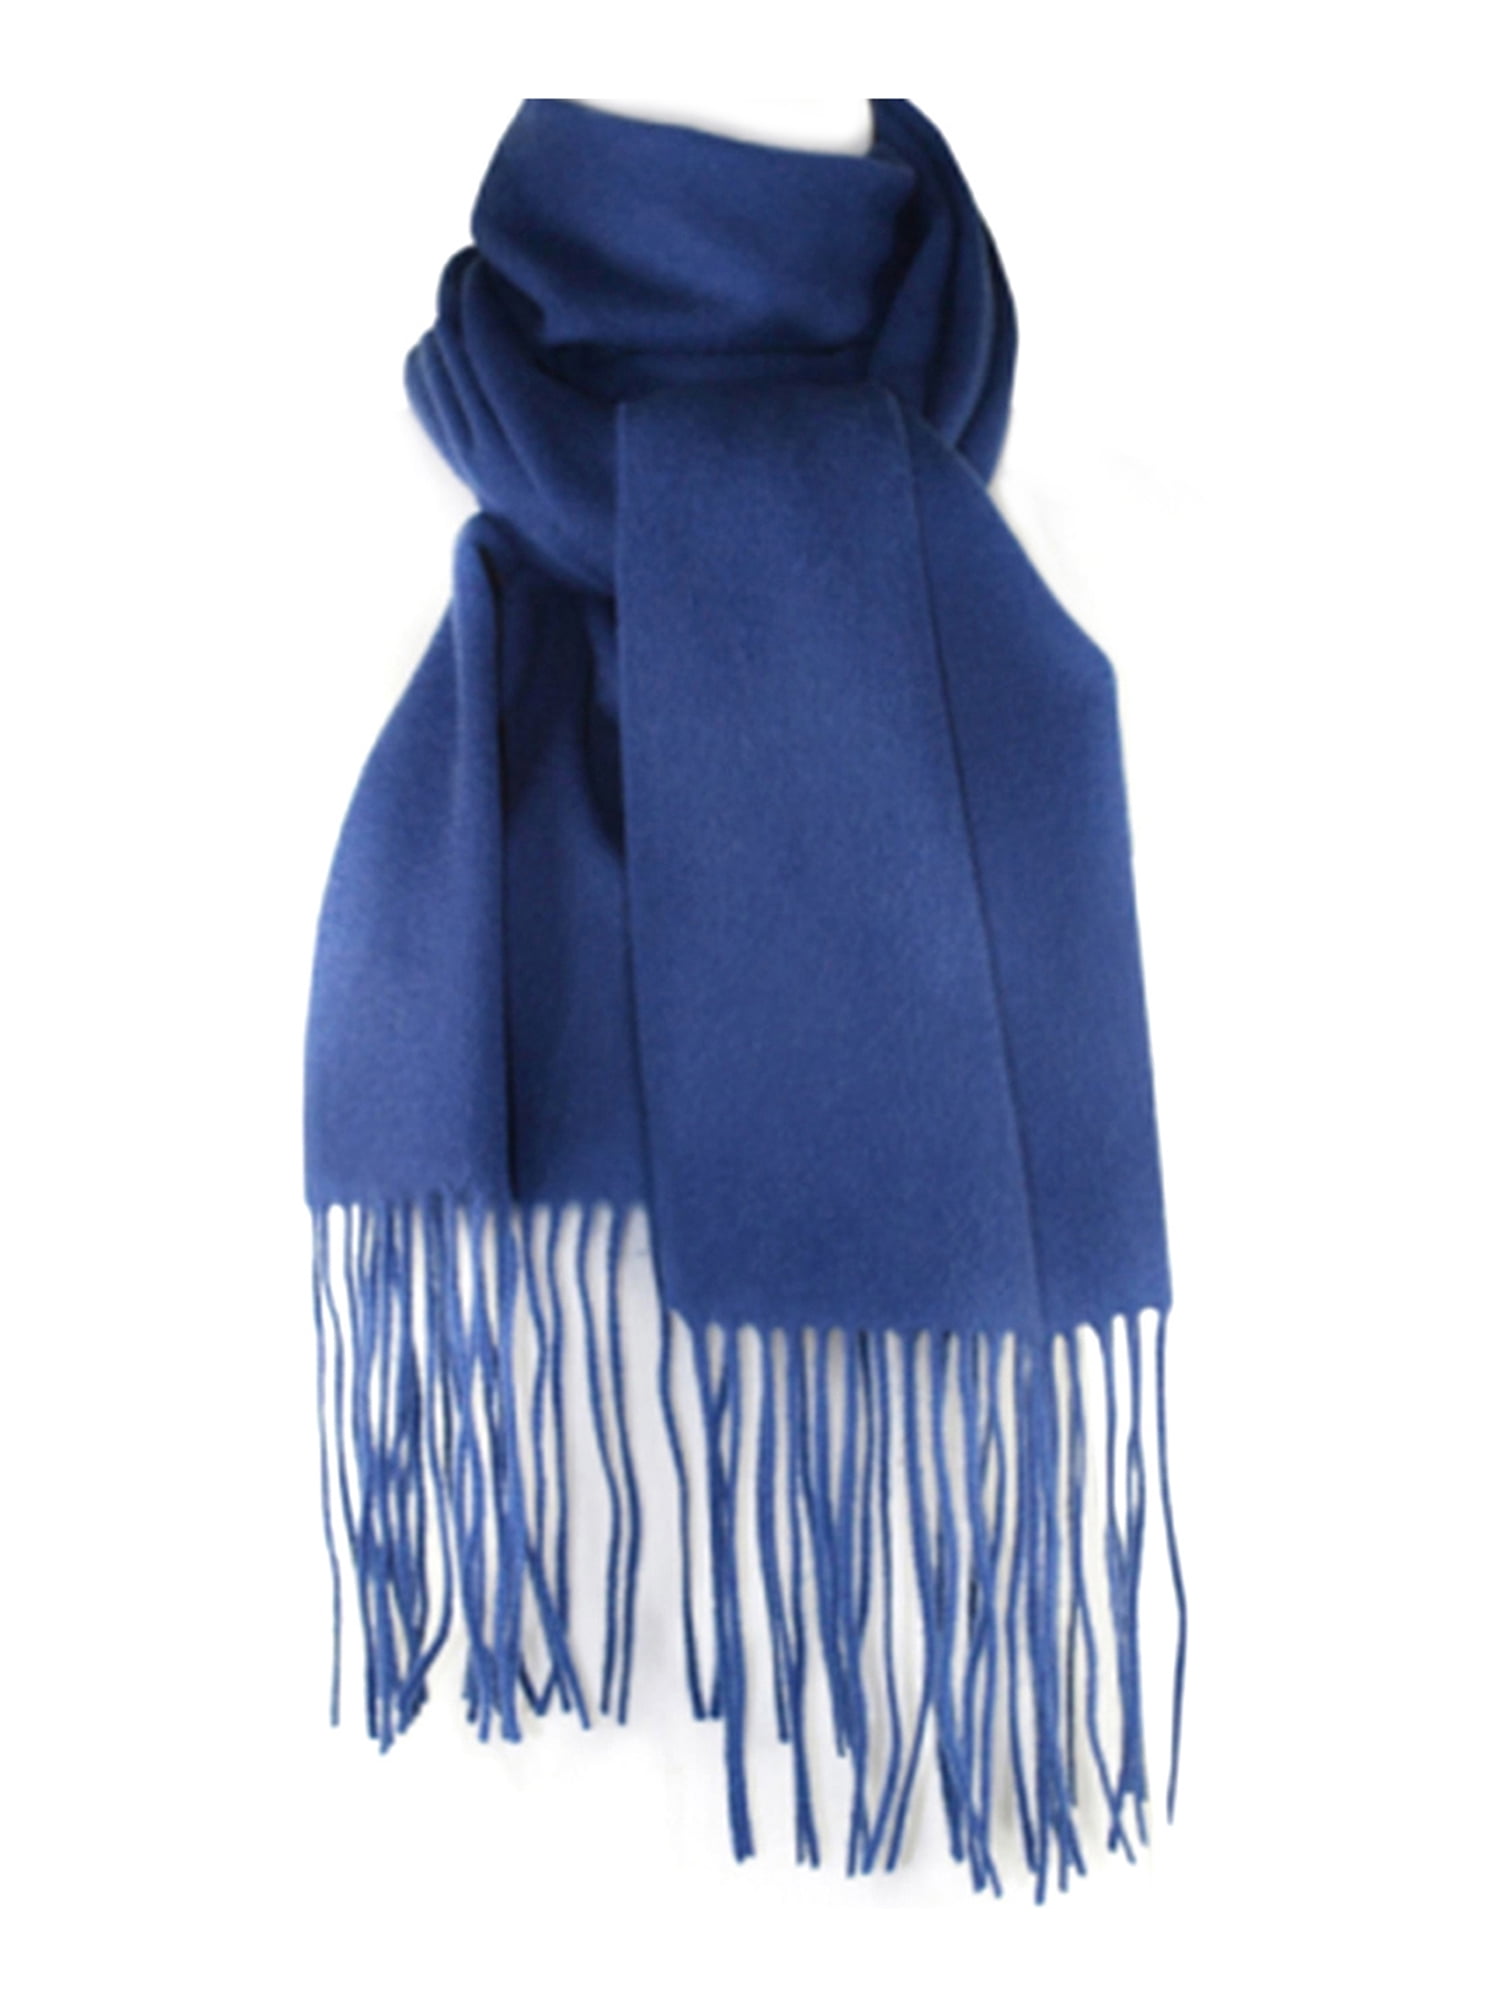 100% CASHMERE Warm PLAIN Scarf pure solid Royal Blue Wool SCOTLAND For Unisex 